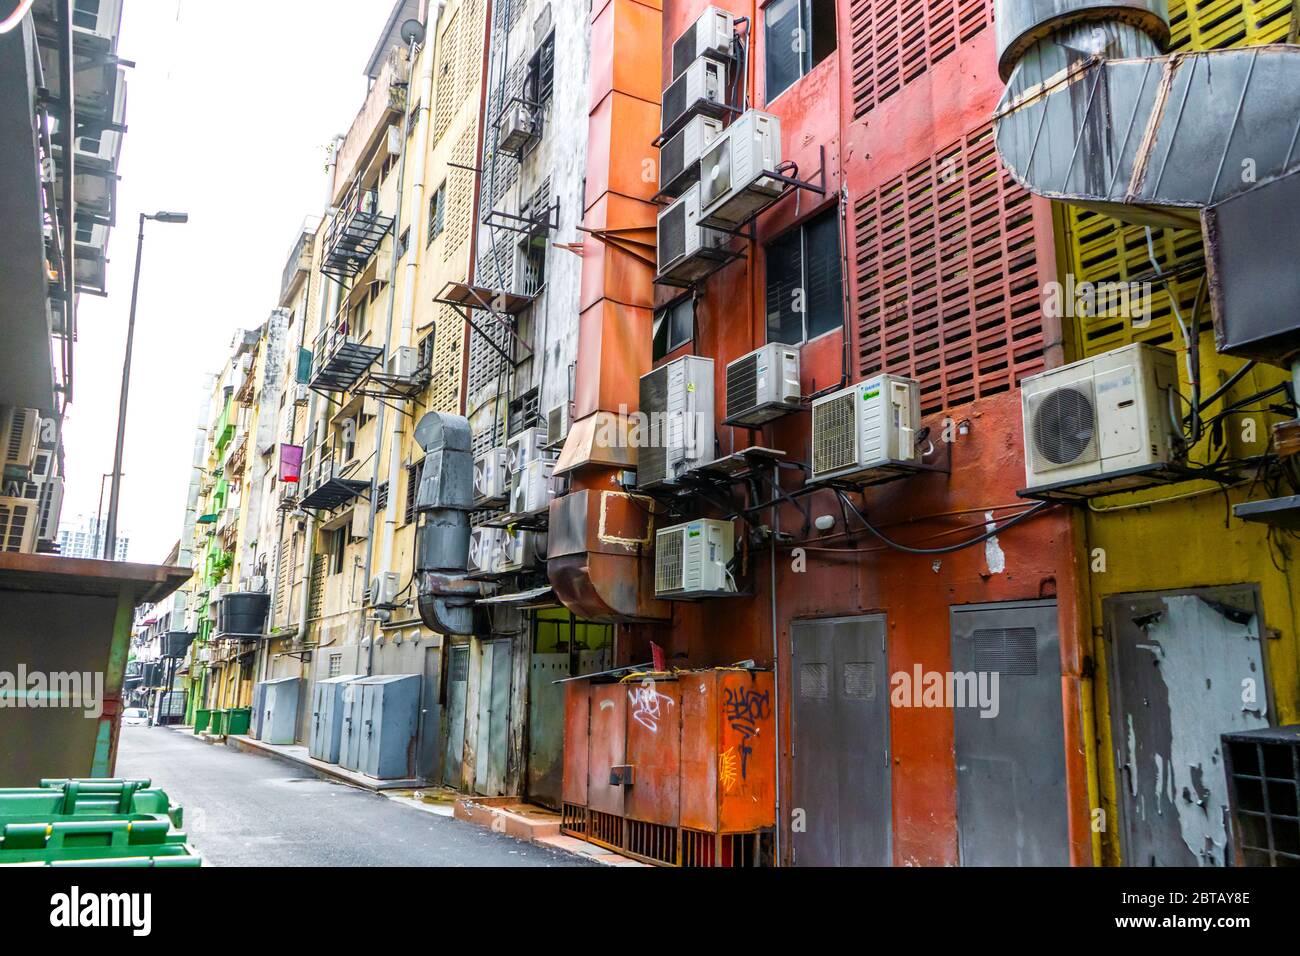 Homes in Asia hung with air conditioning. Hot climate. Narrow streets. The spirit of Asia Stock Photo